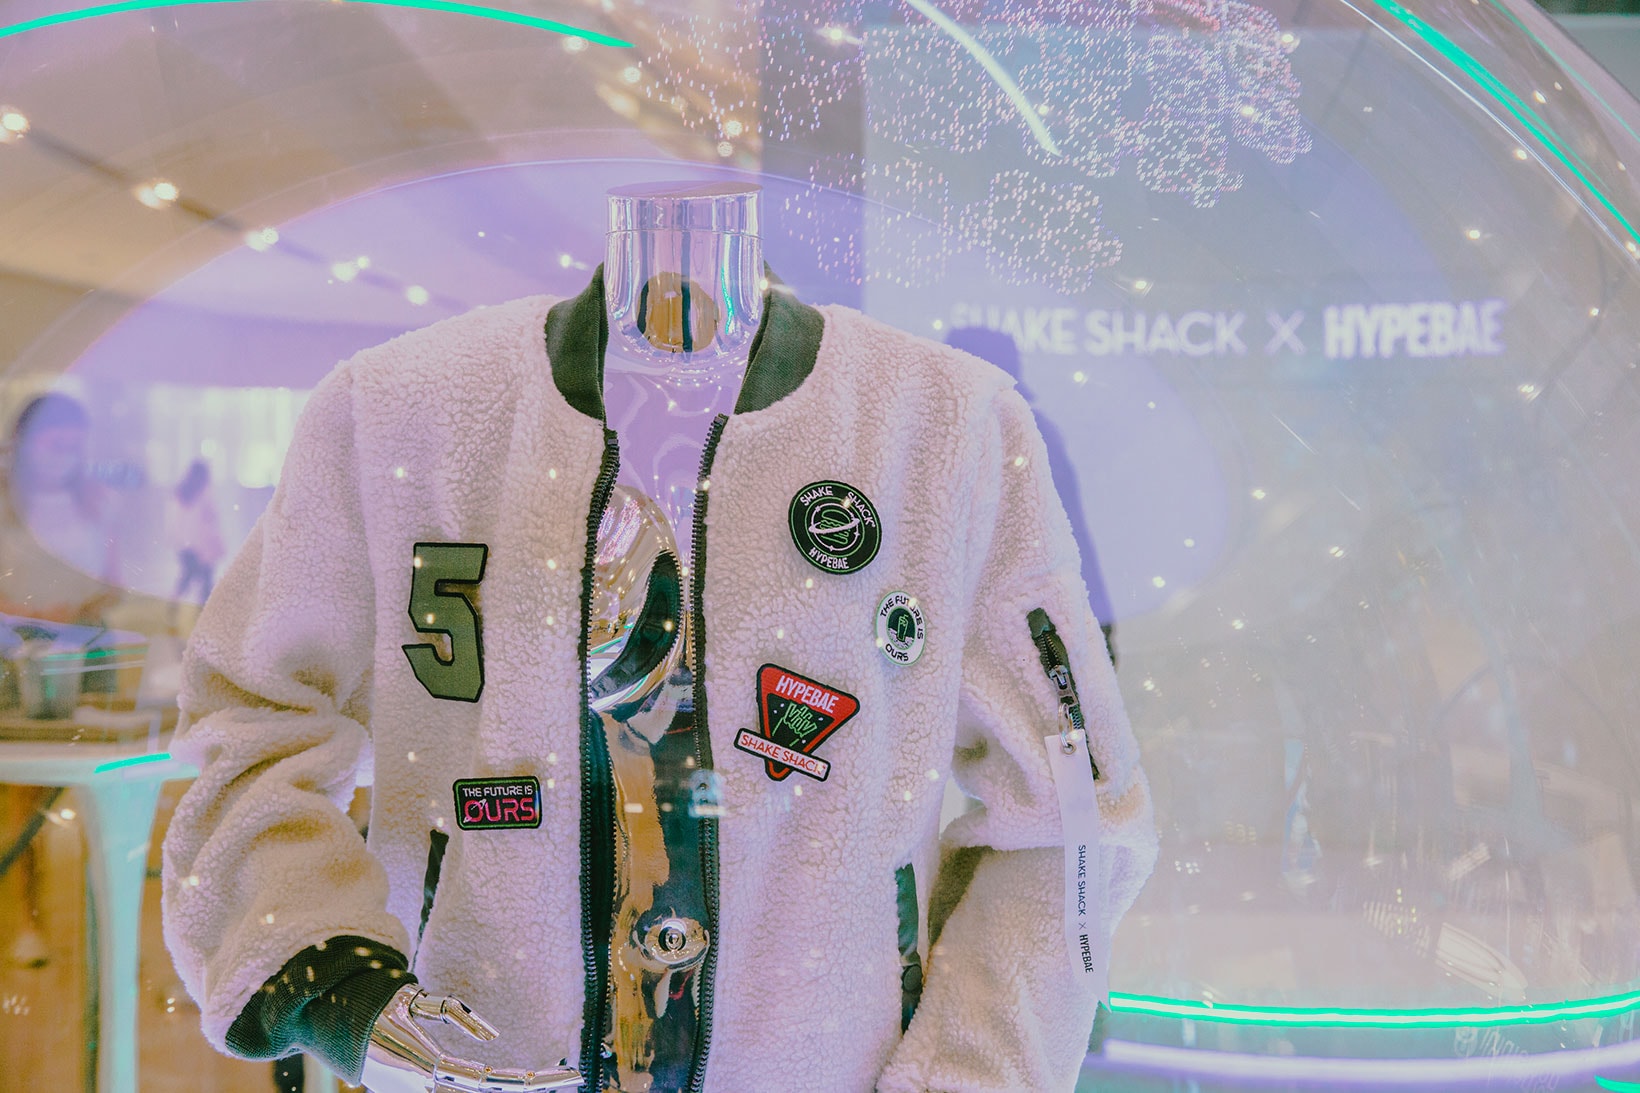 SHAKE SHACK HYPEBAE Pop-Up Collaboration Launch Party Hong Kong Images Location